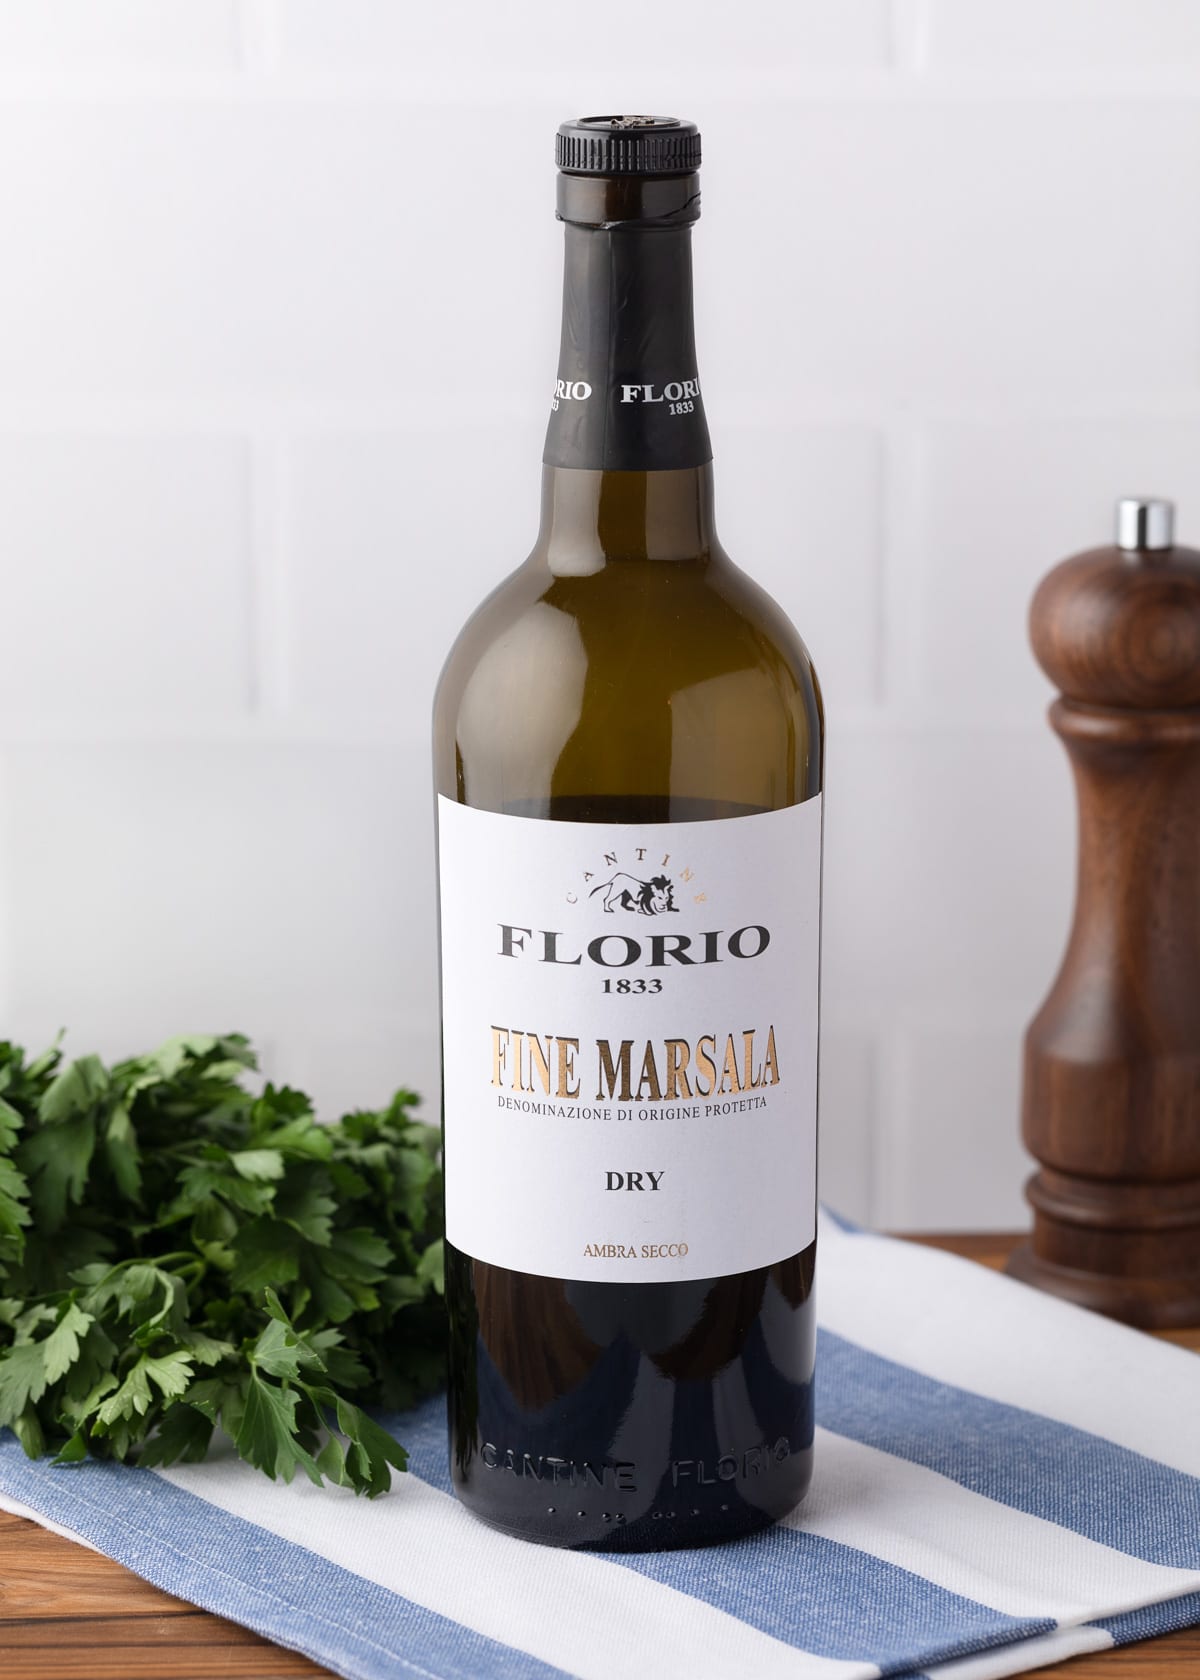 bottle of Florio dry marsala on a blue and white striped napkin 